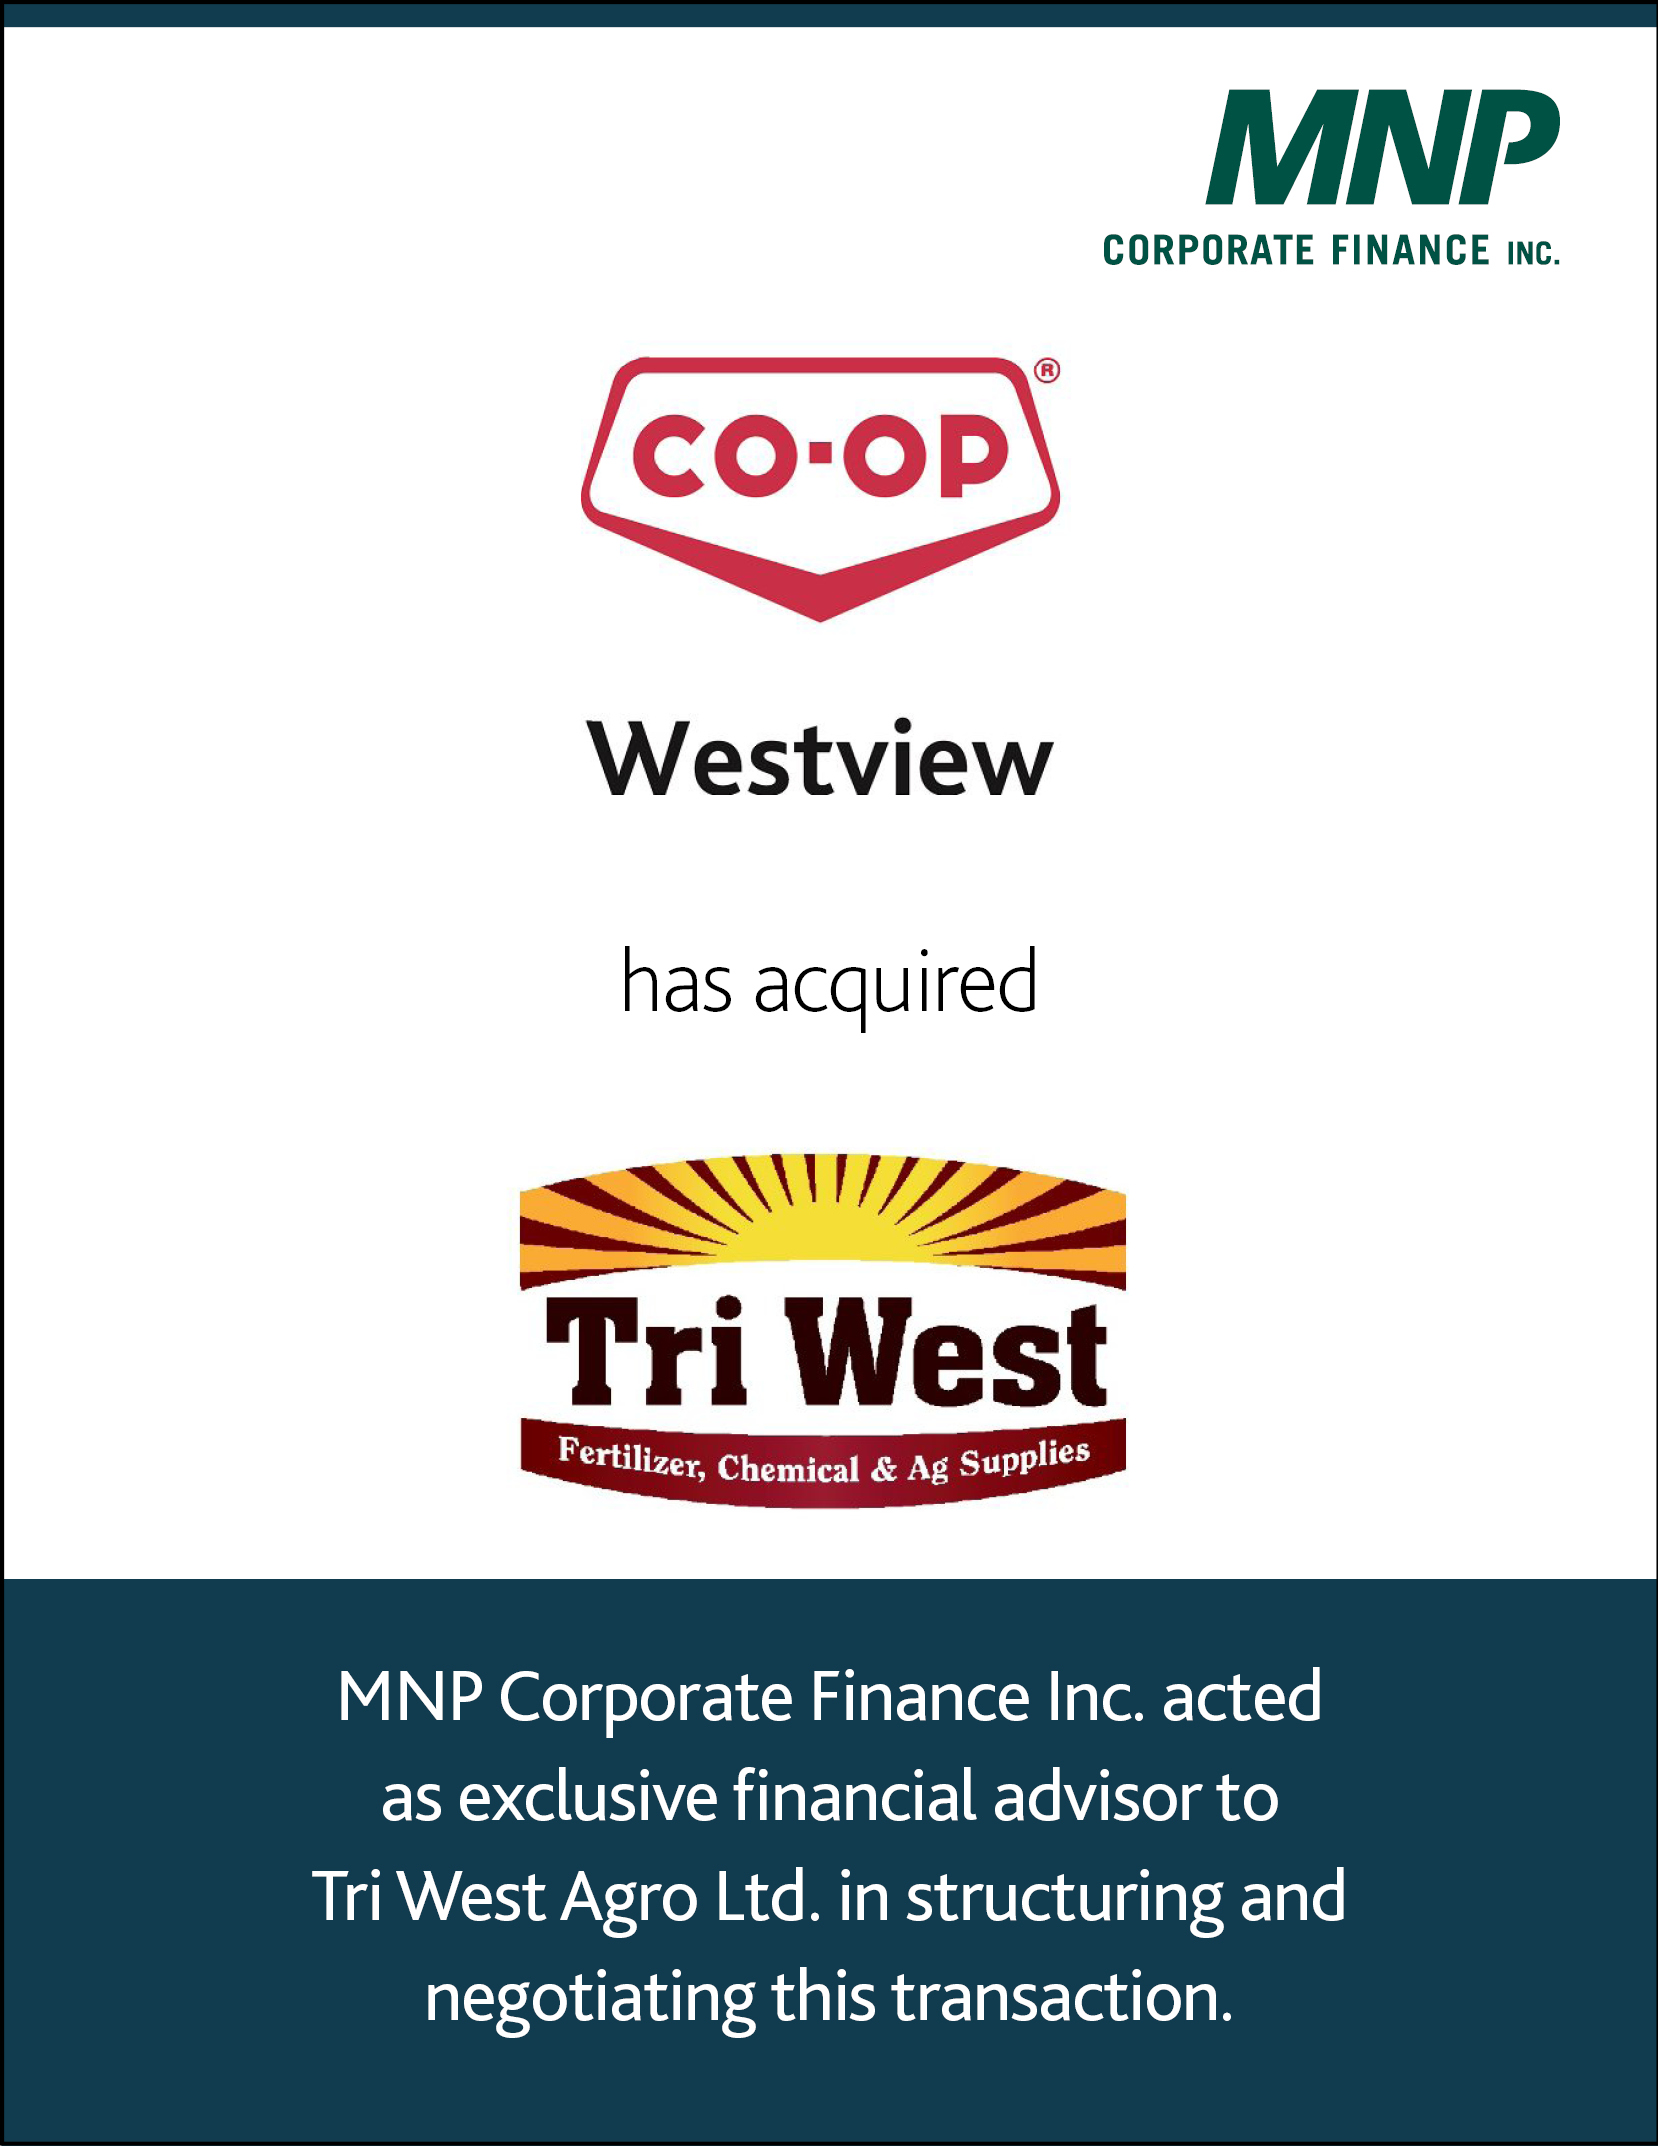 Co-op Westview has acquired Tri West Fertilizer, Chemical & Ag Supplies 